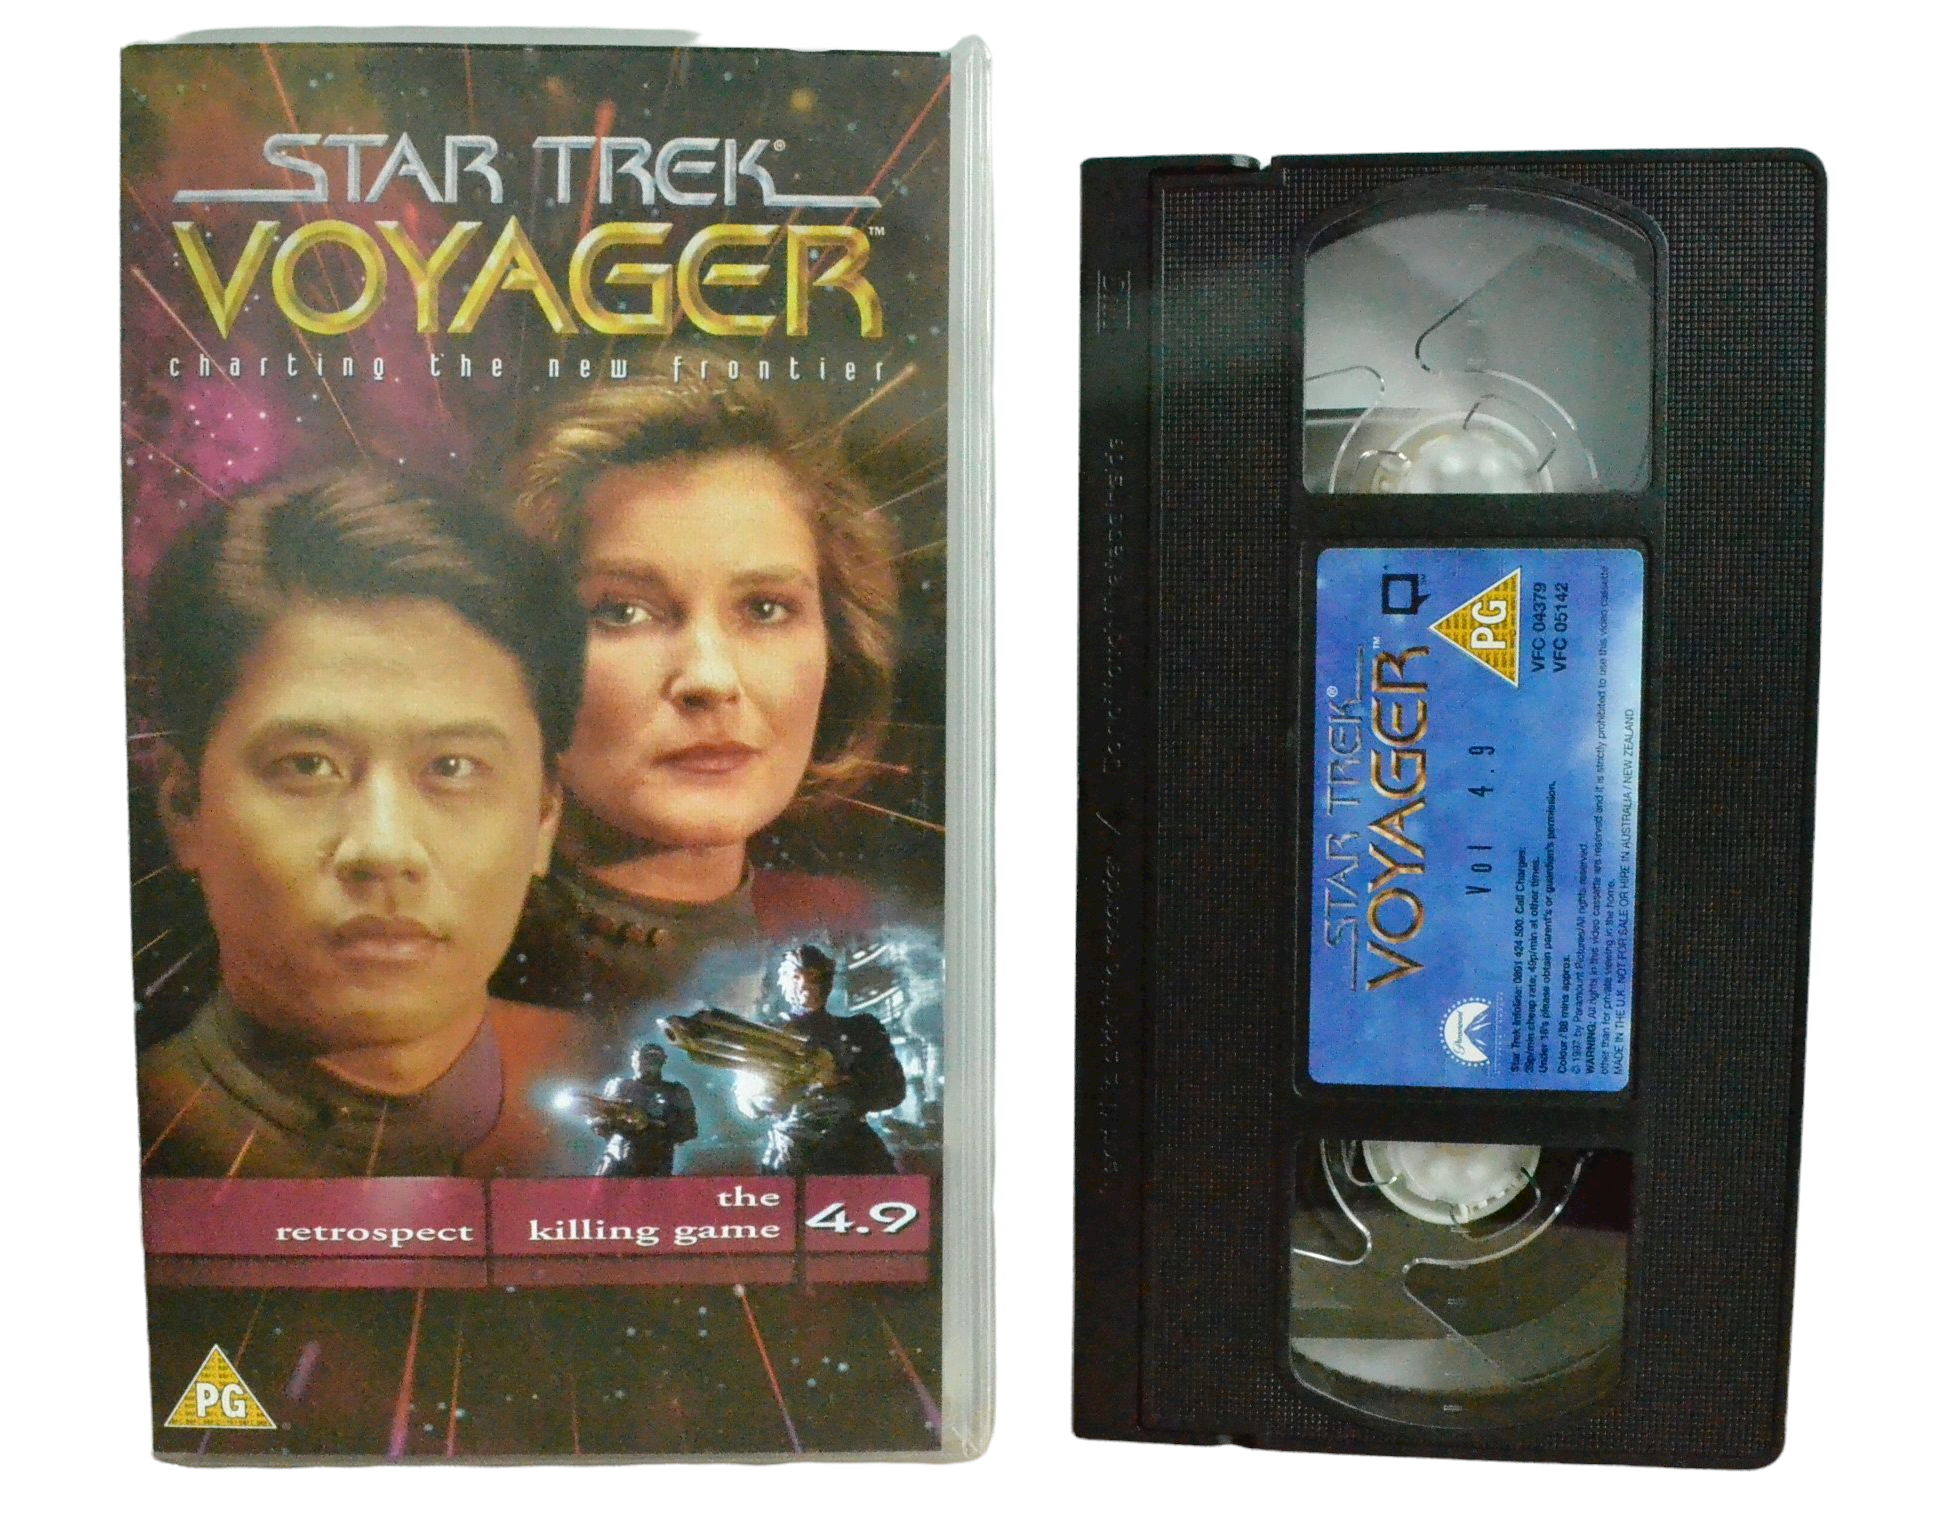 Star Trek Voyager-charting The New Frontier - Kate Mulgrew - CIC Video - Vintage - Pal VHS-